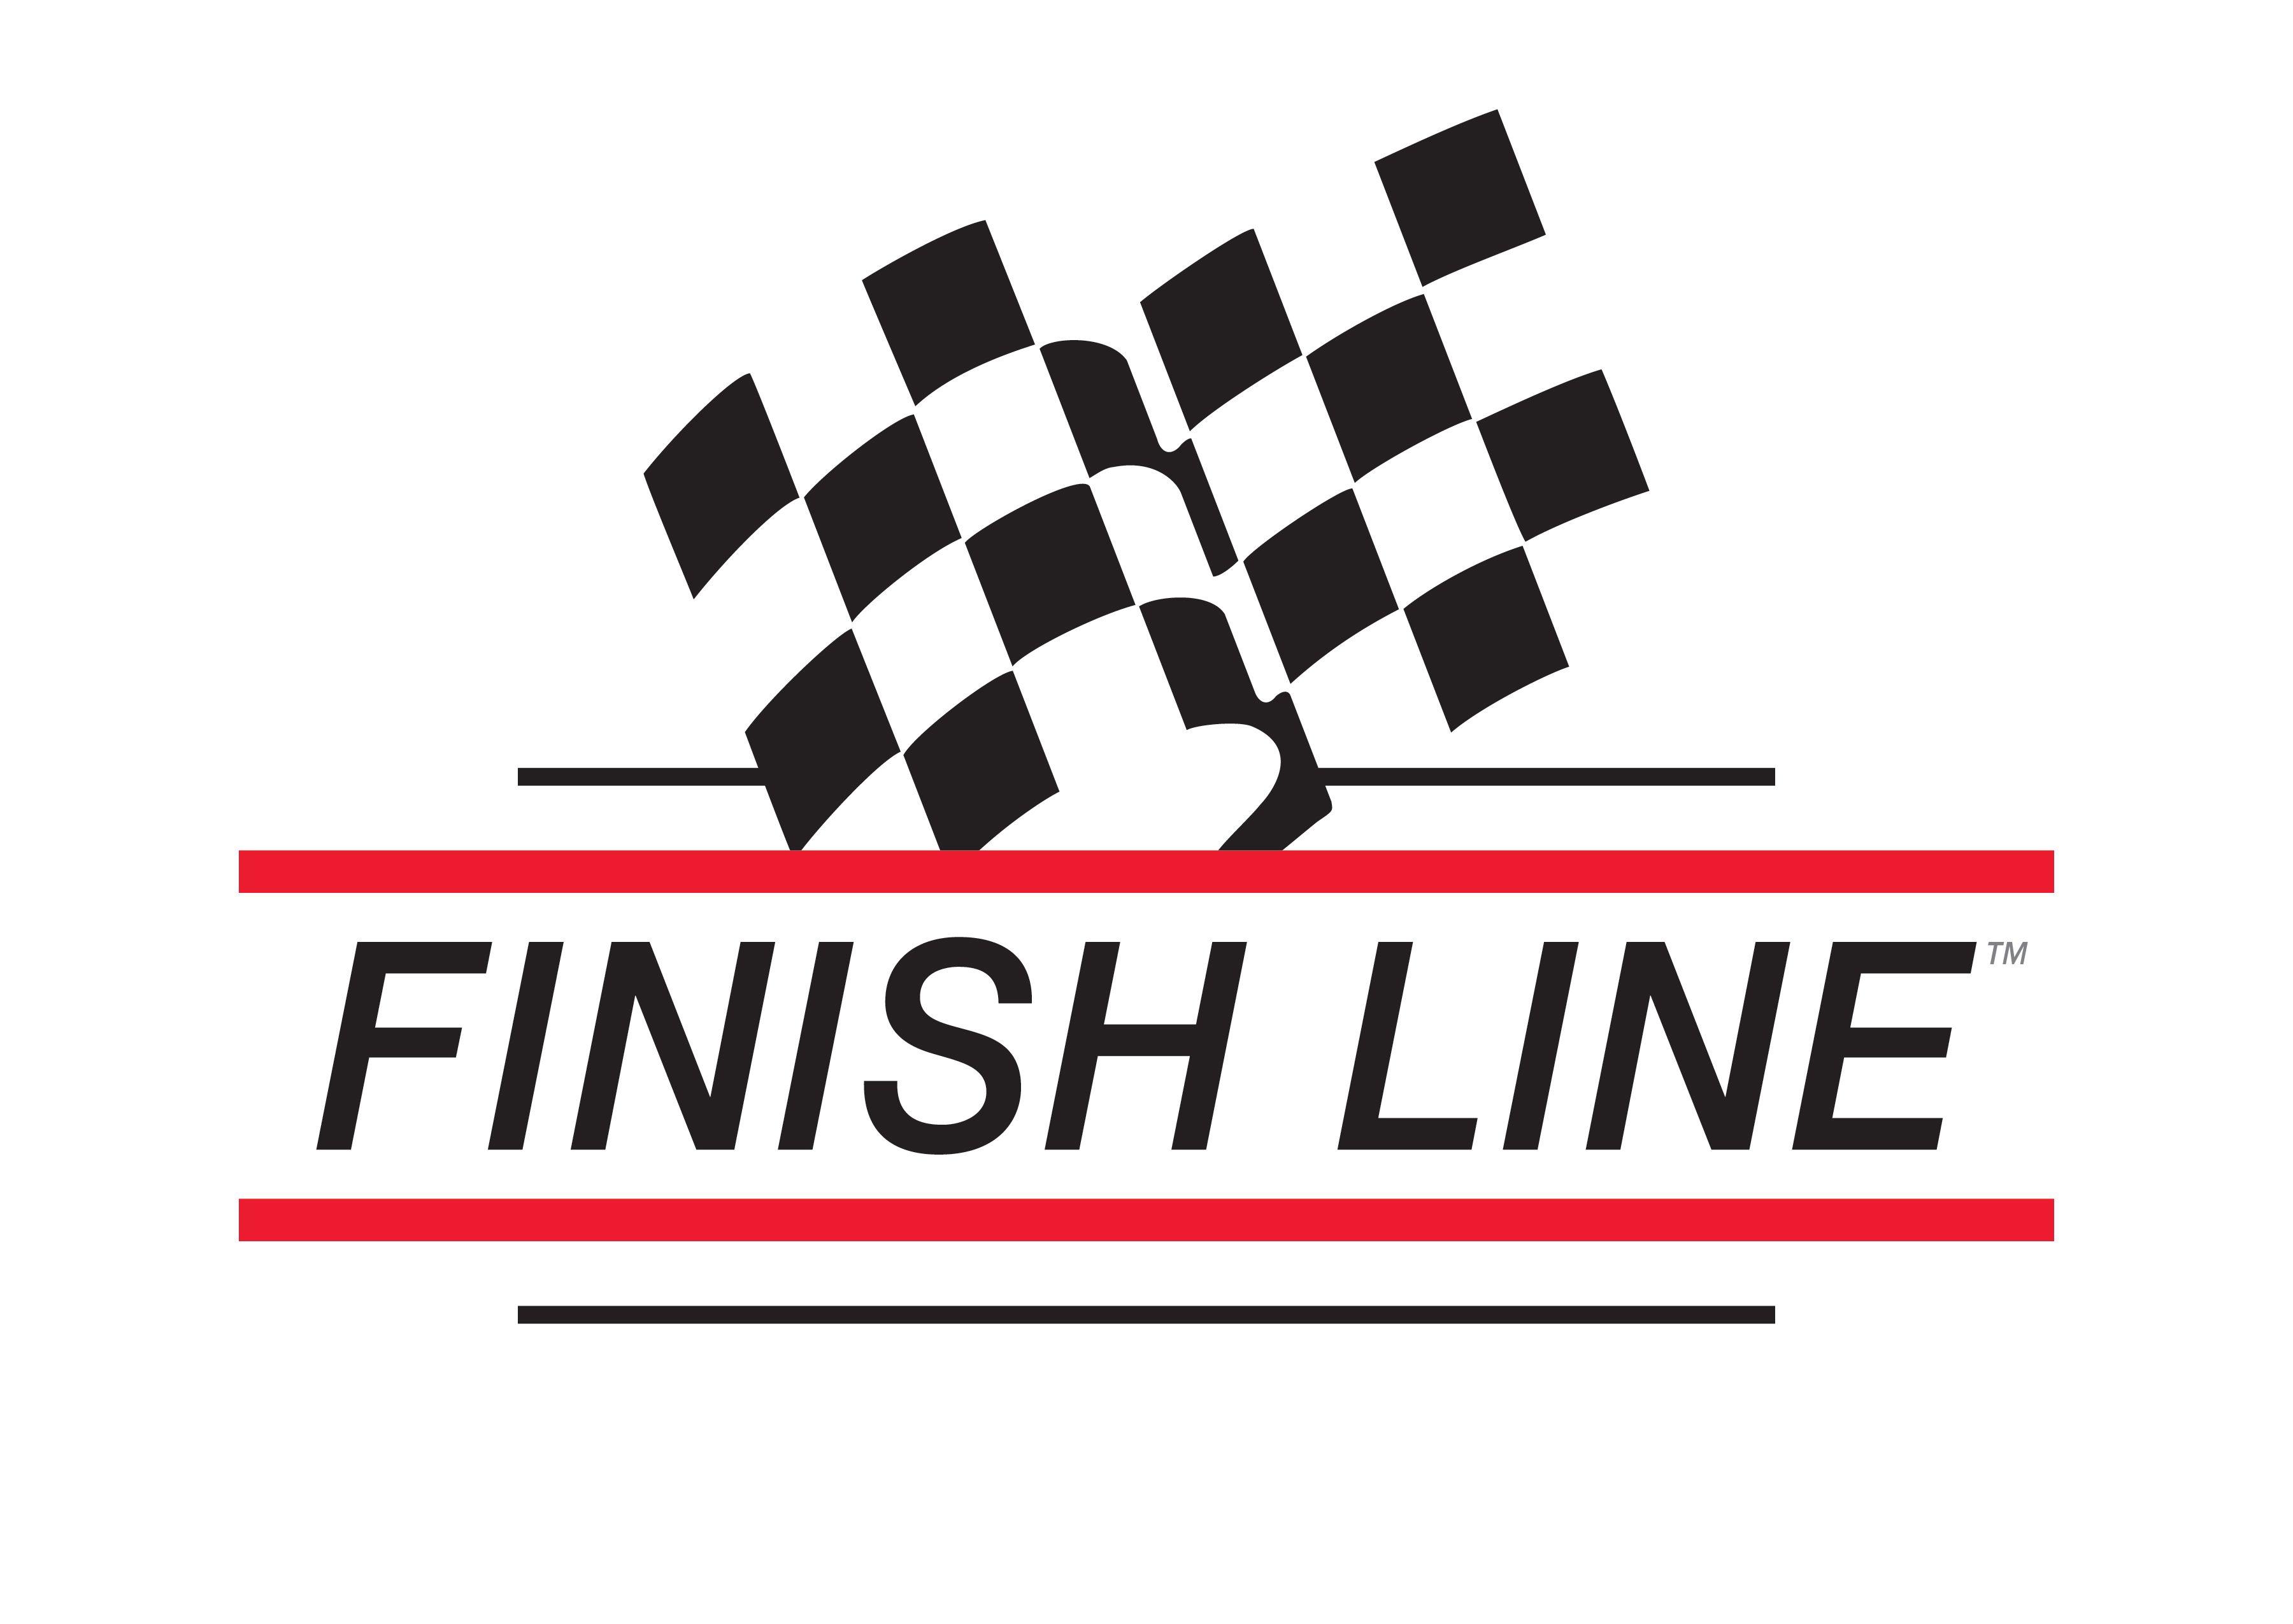 Finishline Logo - Finish Line Lubricants and Care Products